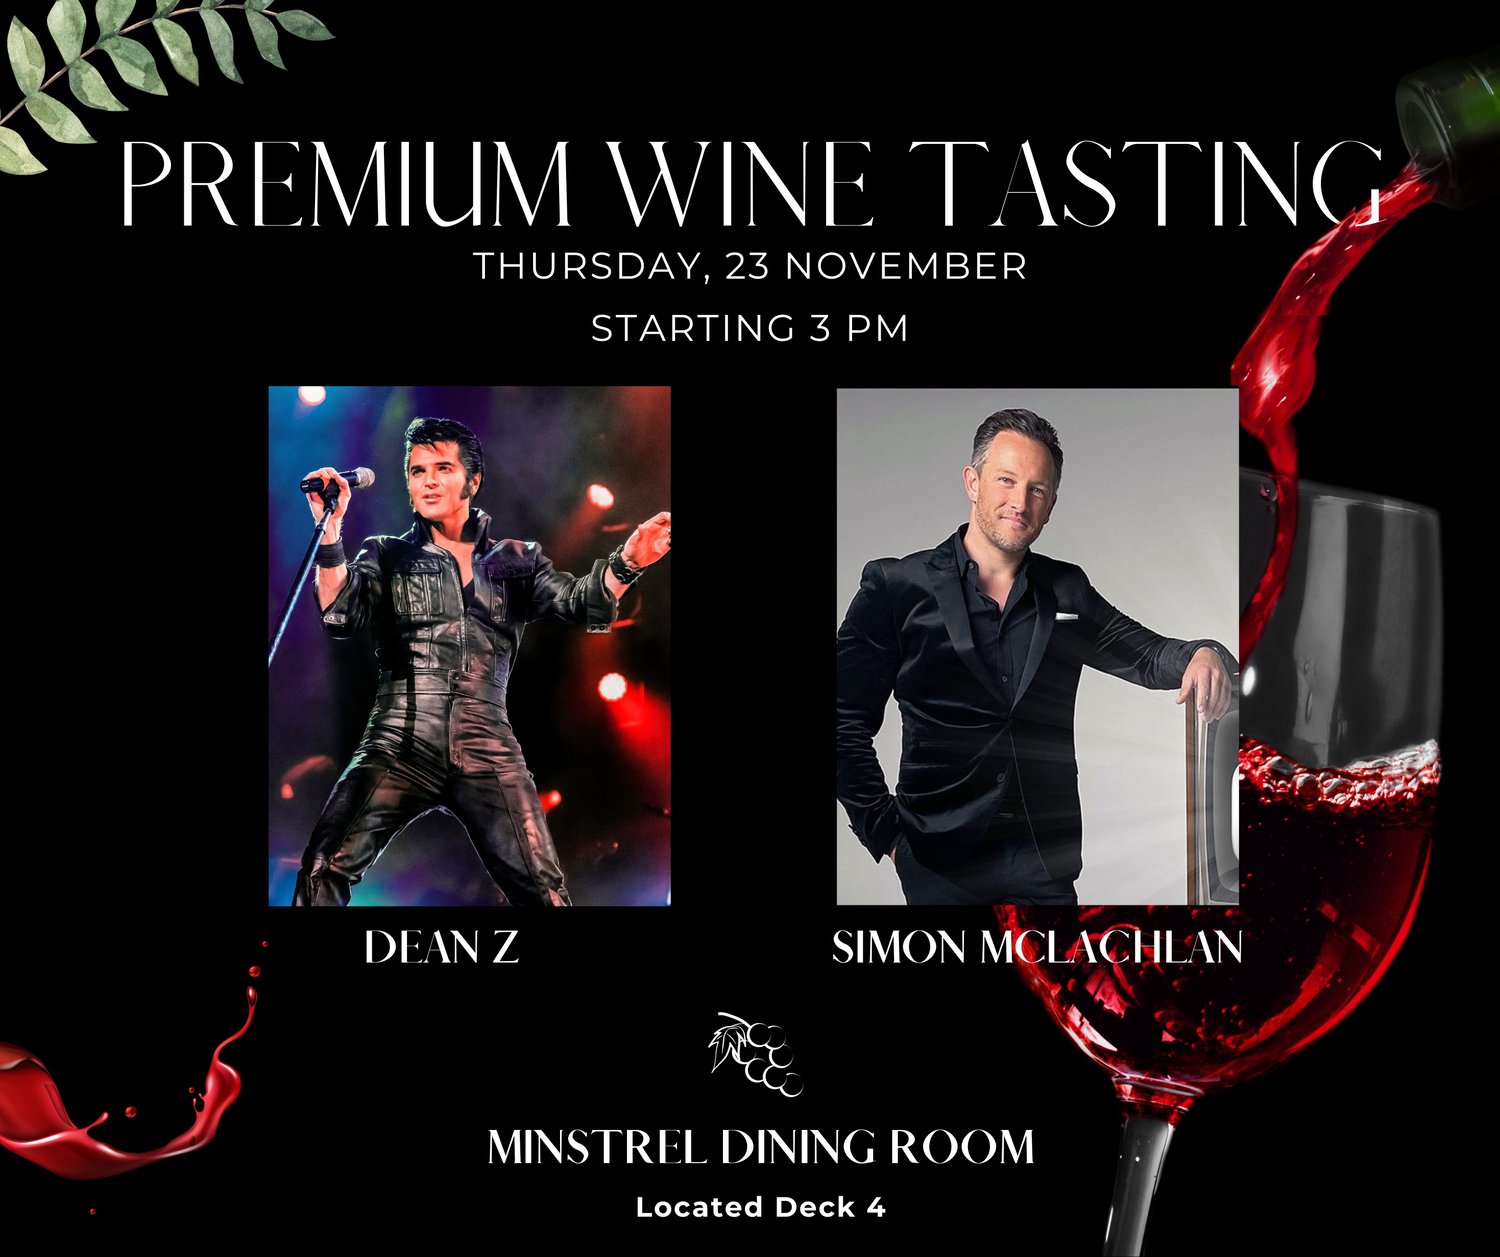 Image of BLUE SUEDE CRUISE ARTIST EXPERIENCE: Wine Tasting with Dean Z & Simon McLachlan